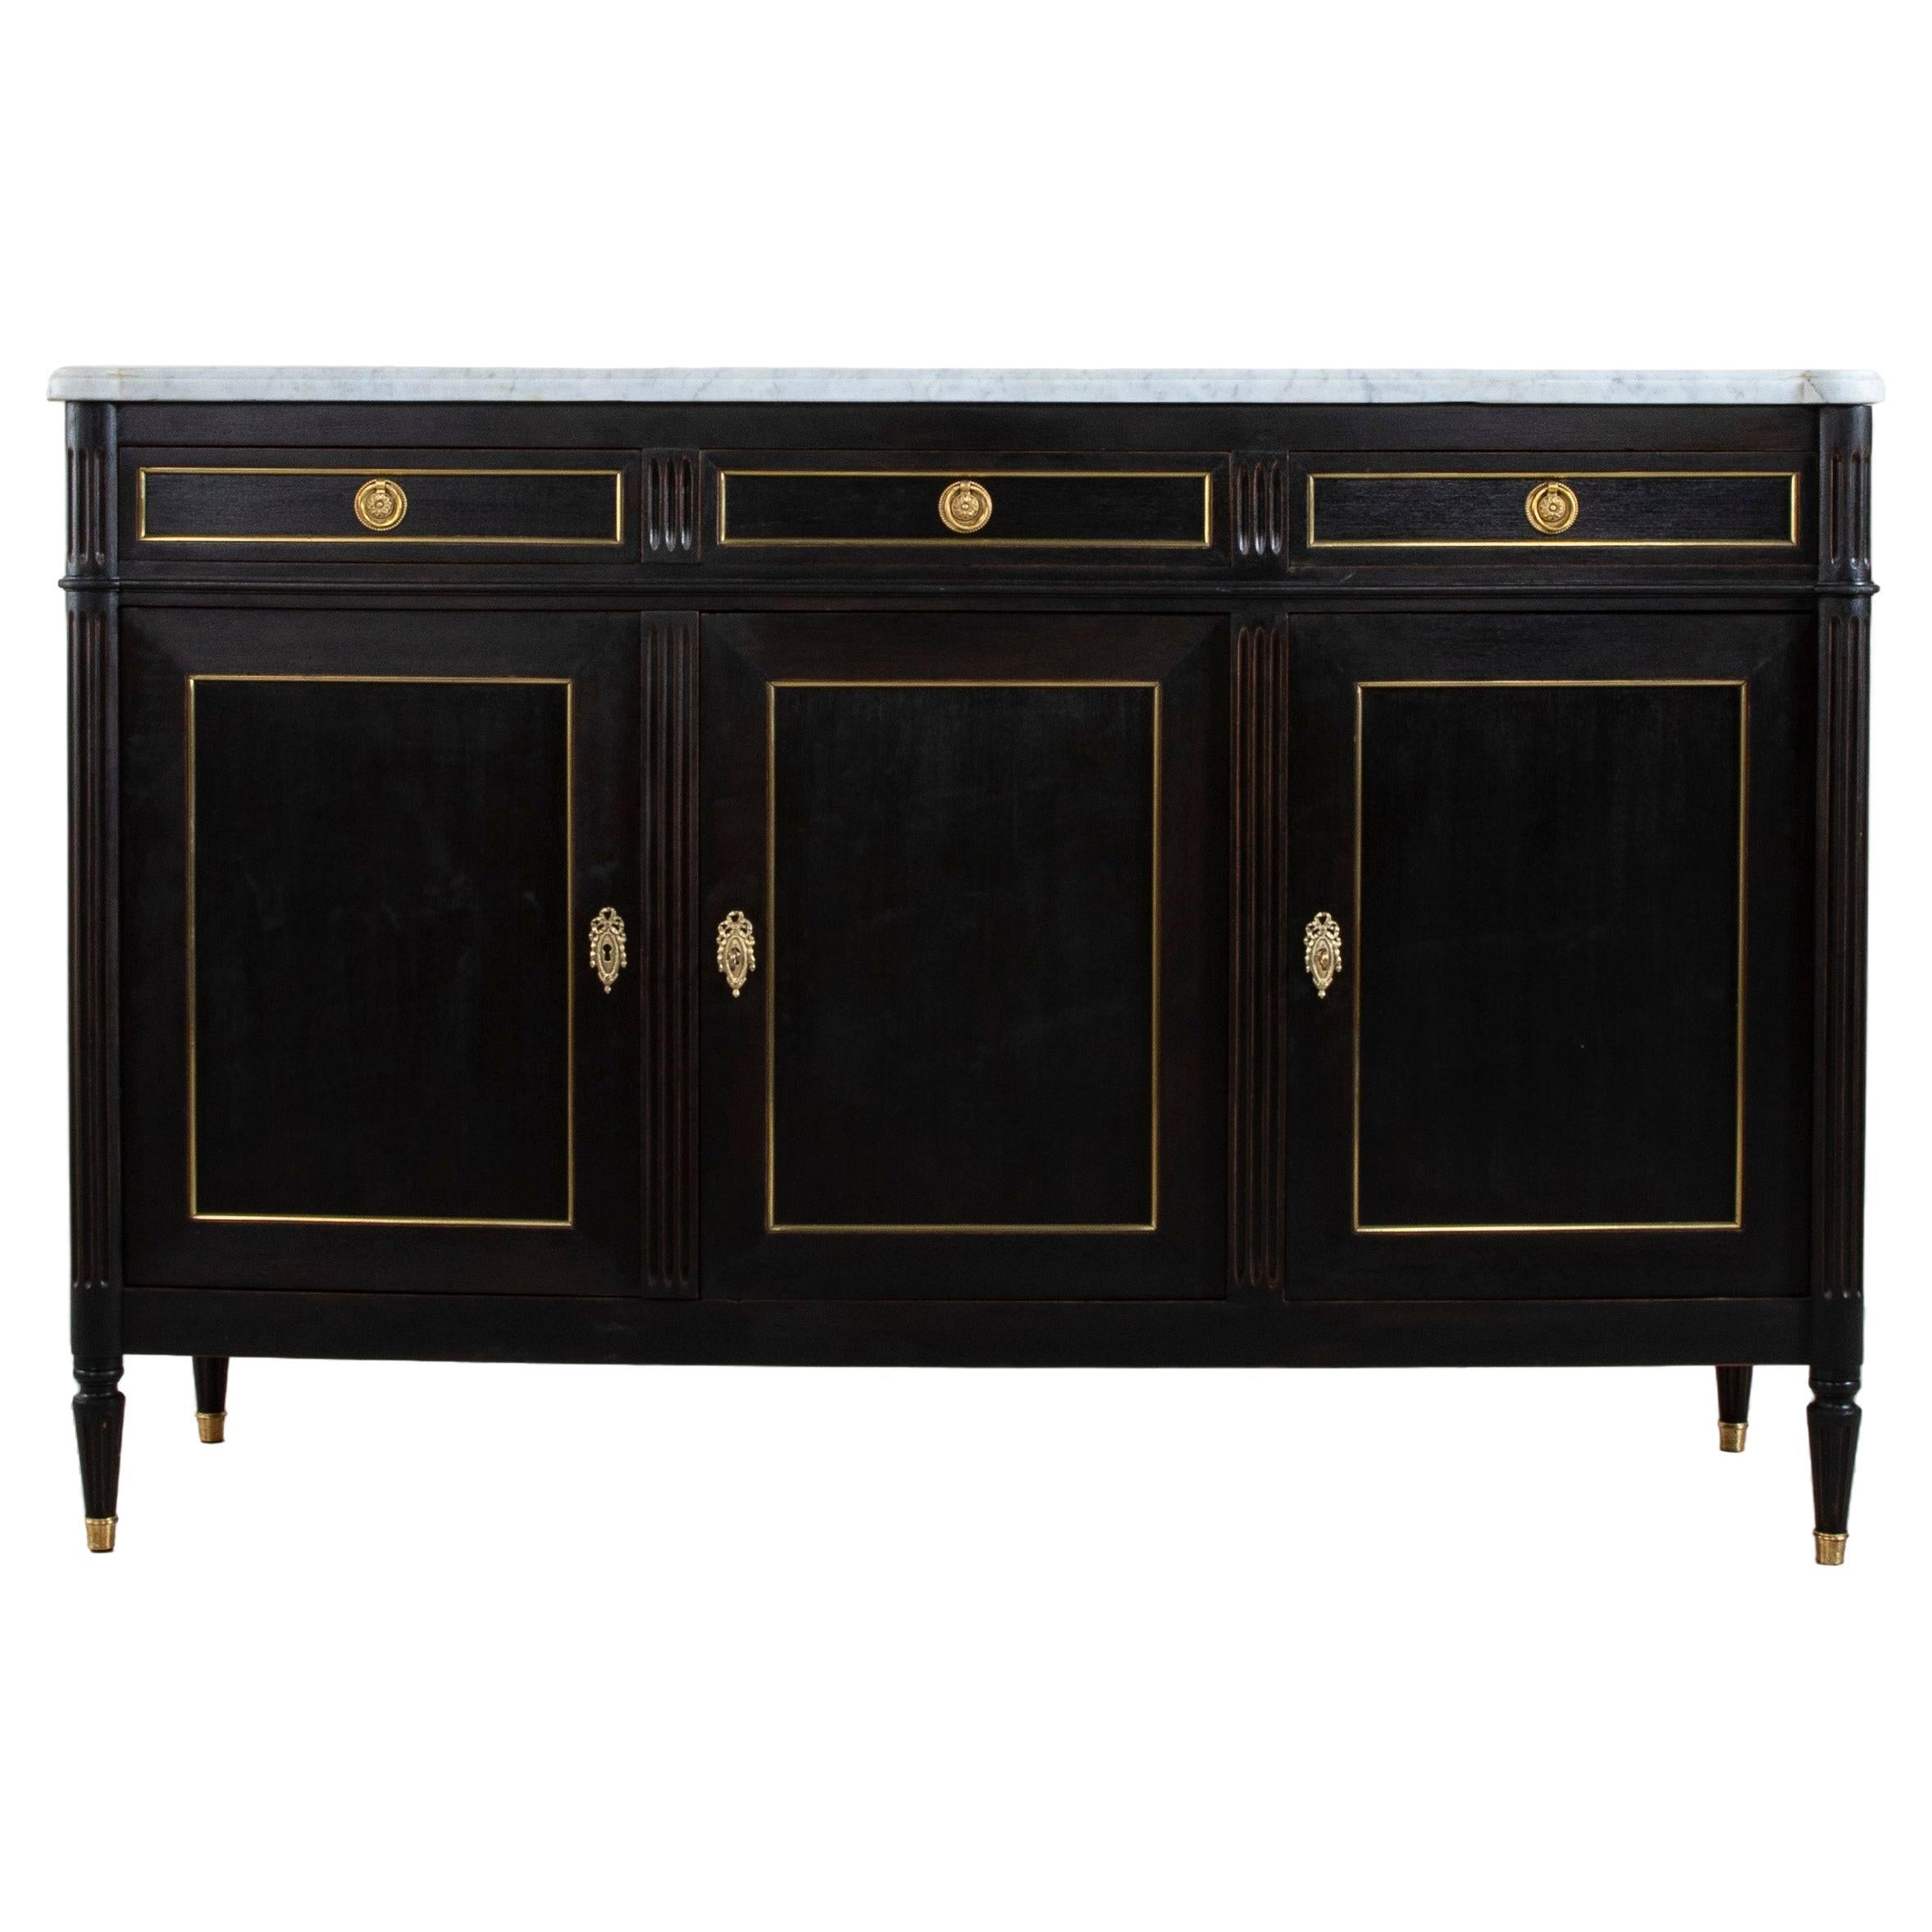 Early 20th Century French Louis XVI Style Black Painted Buffet, Sideboard